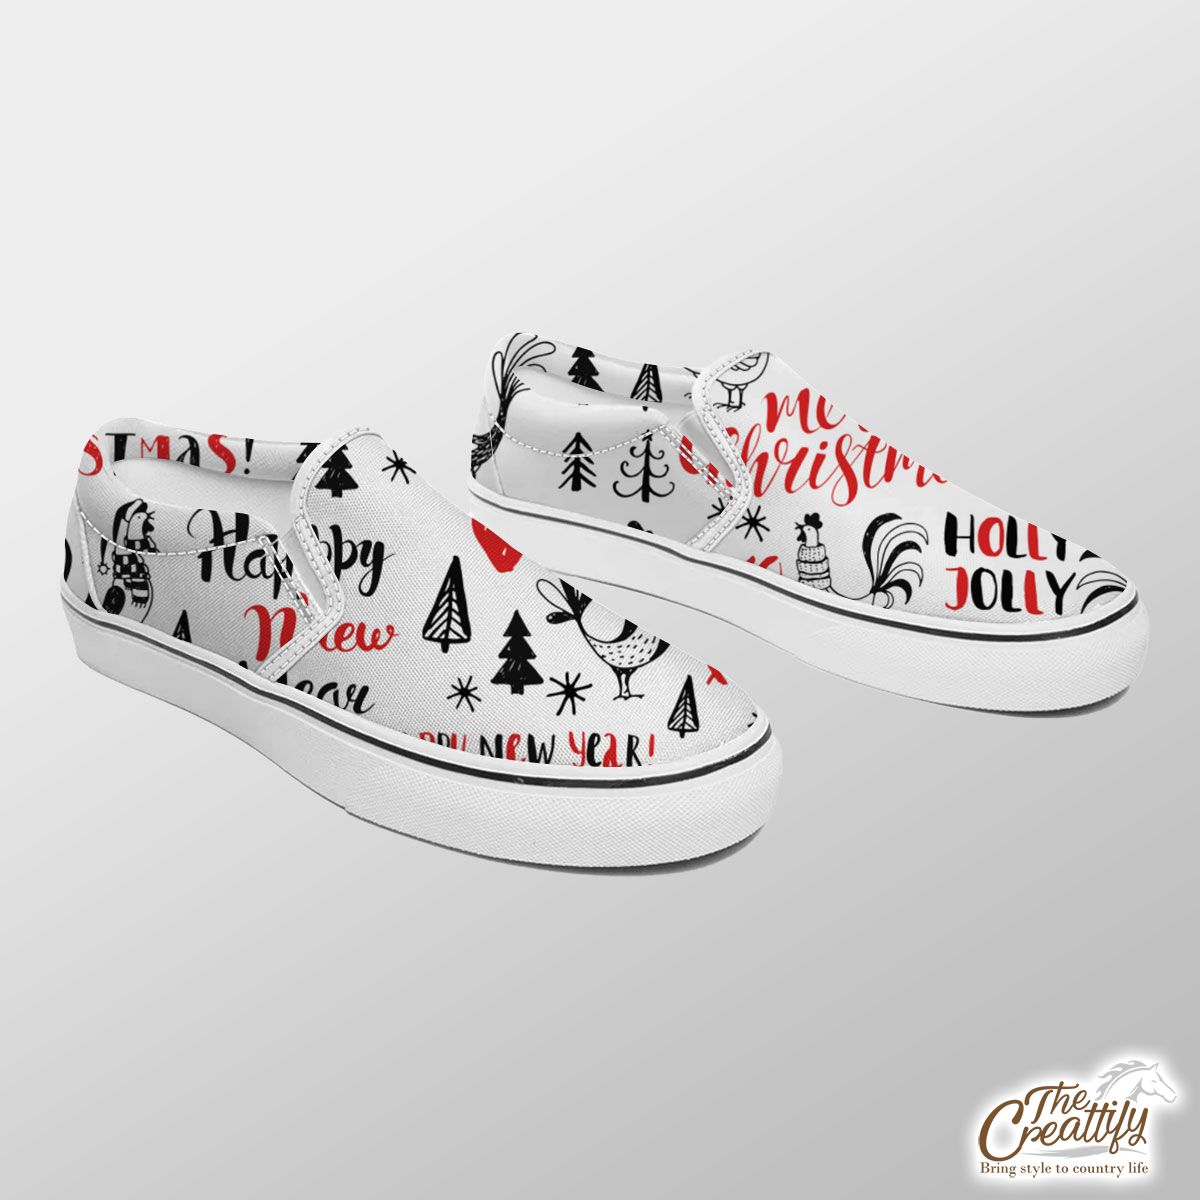 Holly Jolly, Merry Christmas With Turkey And Pine Tree Silhouette White Pattern Slip On Sneakers